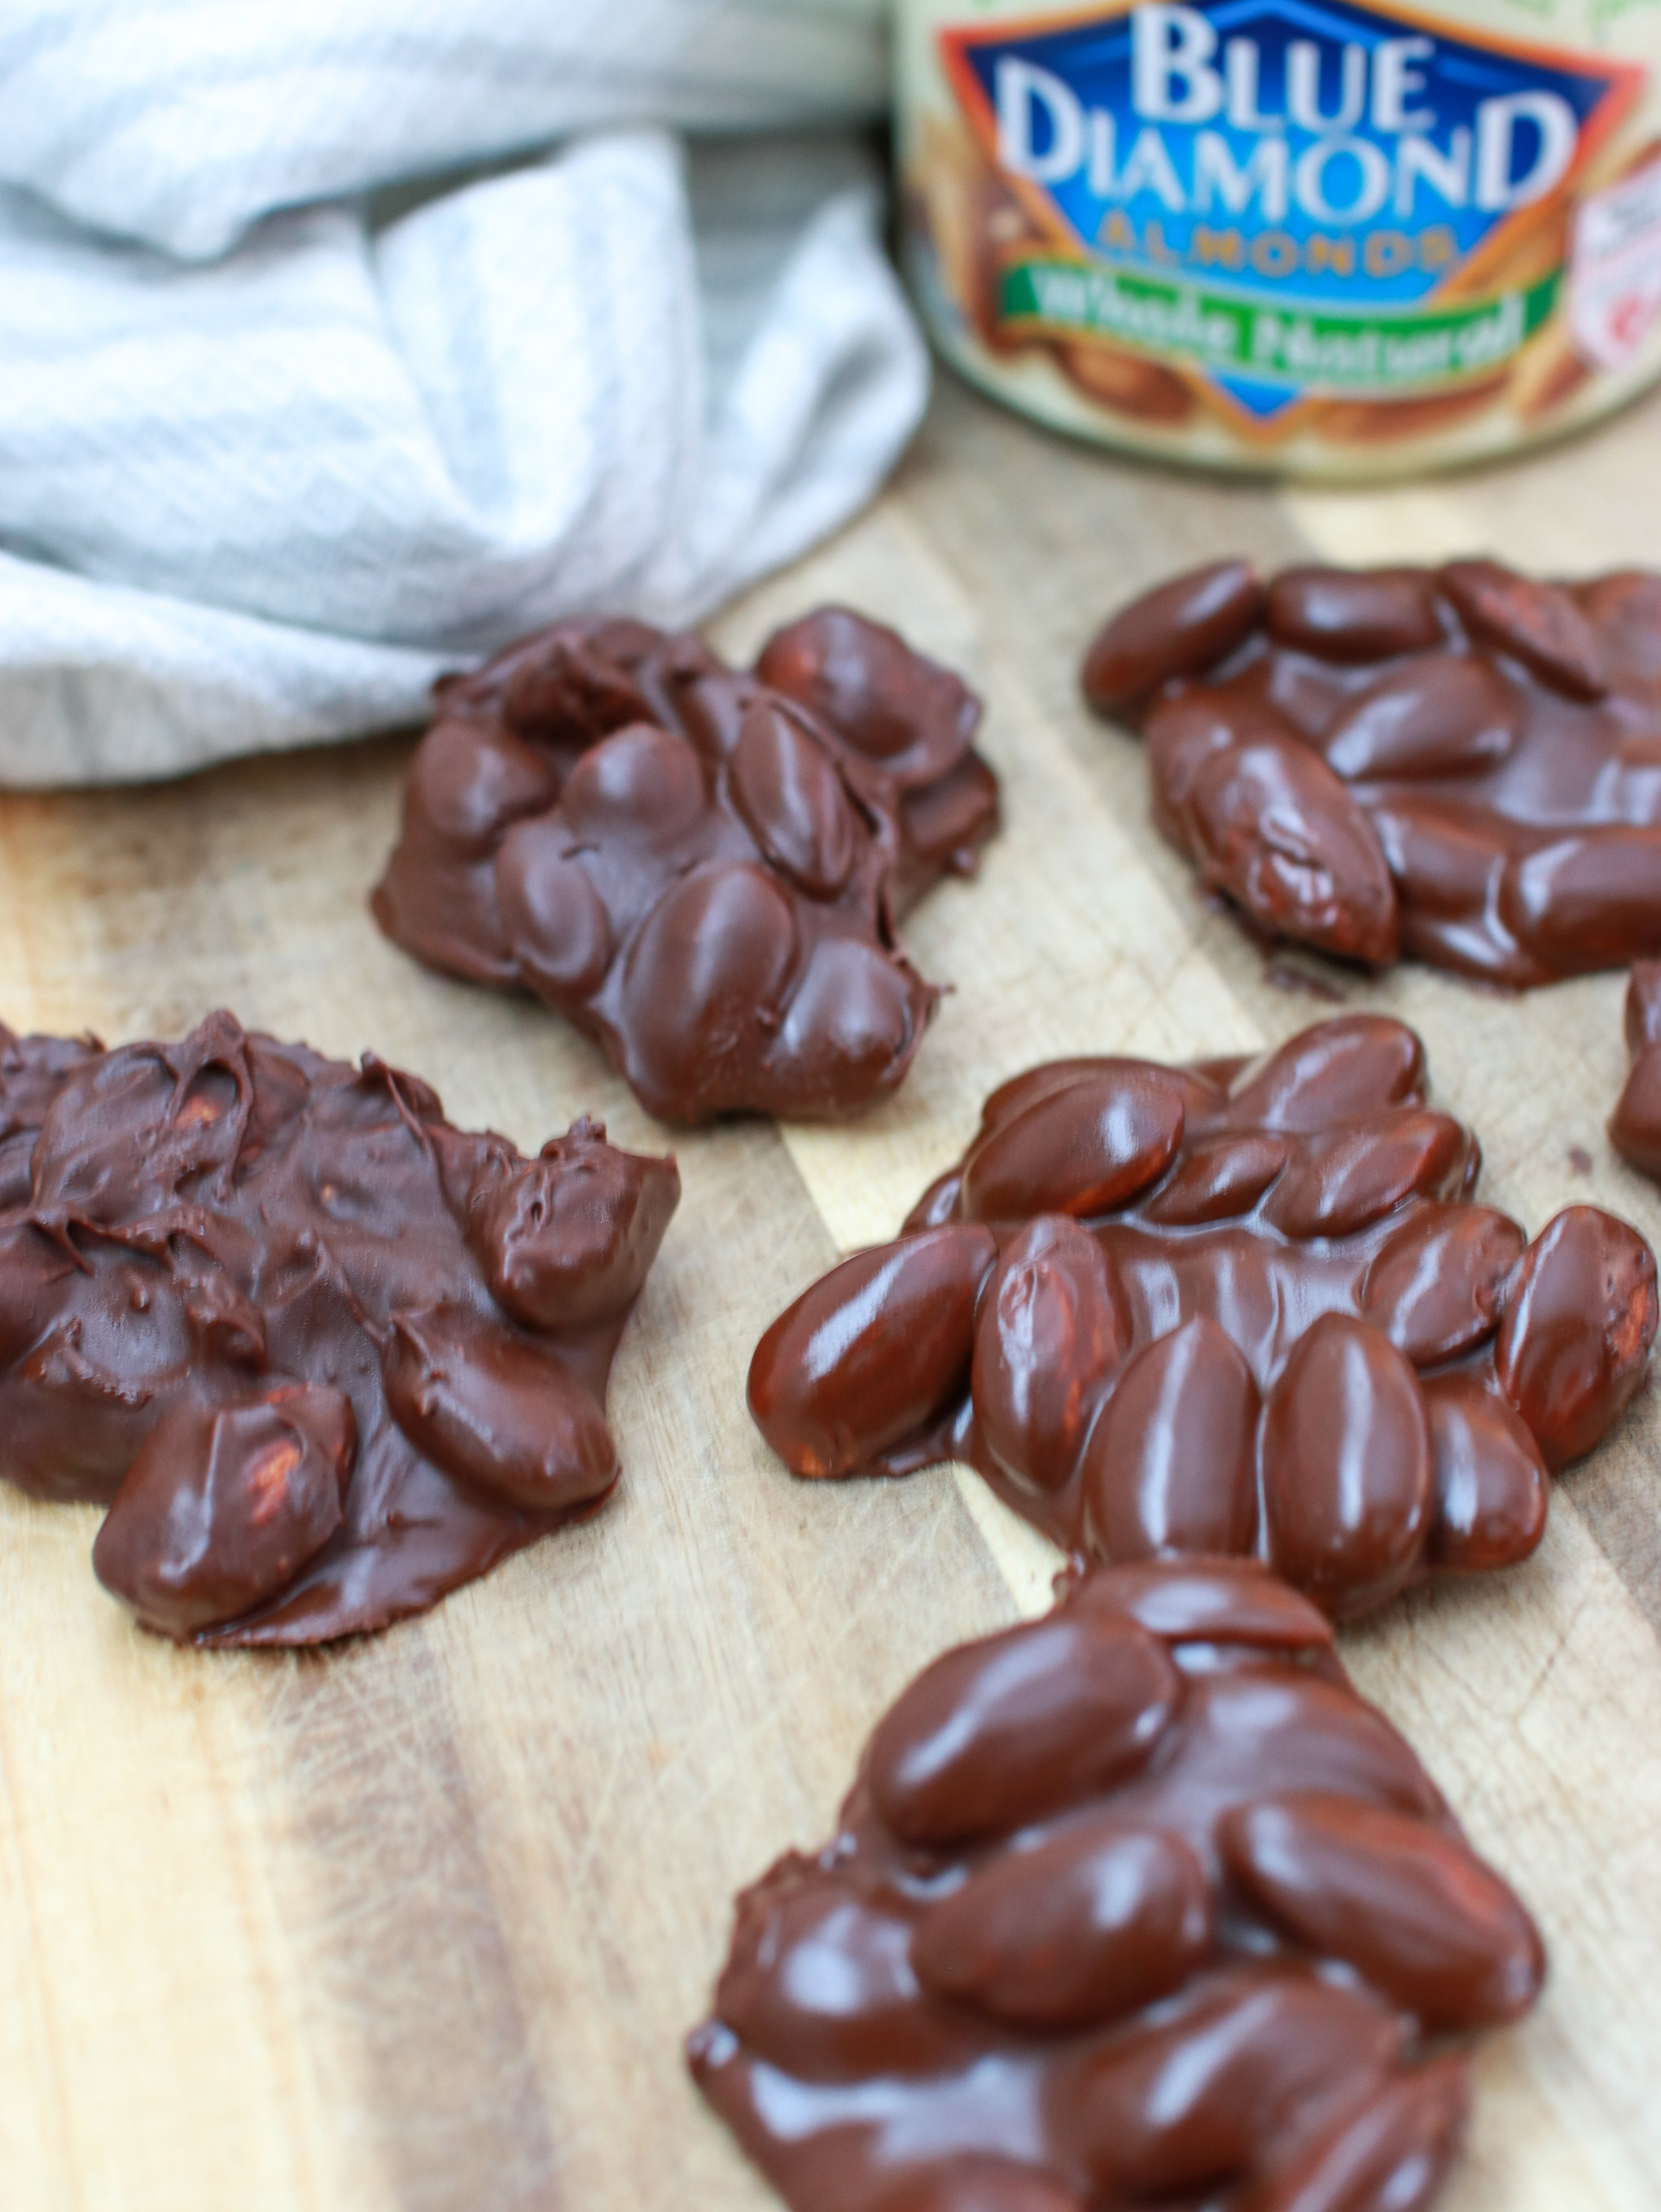 Are following keto?Do you love eating nuts? Orange County Blogger Debbie Savage is sharing her favorite crunchy yet delicious keto approved snack here! #WholeNaturalAlmonds #SimplyDelicious